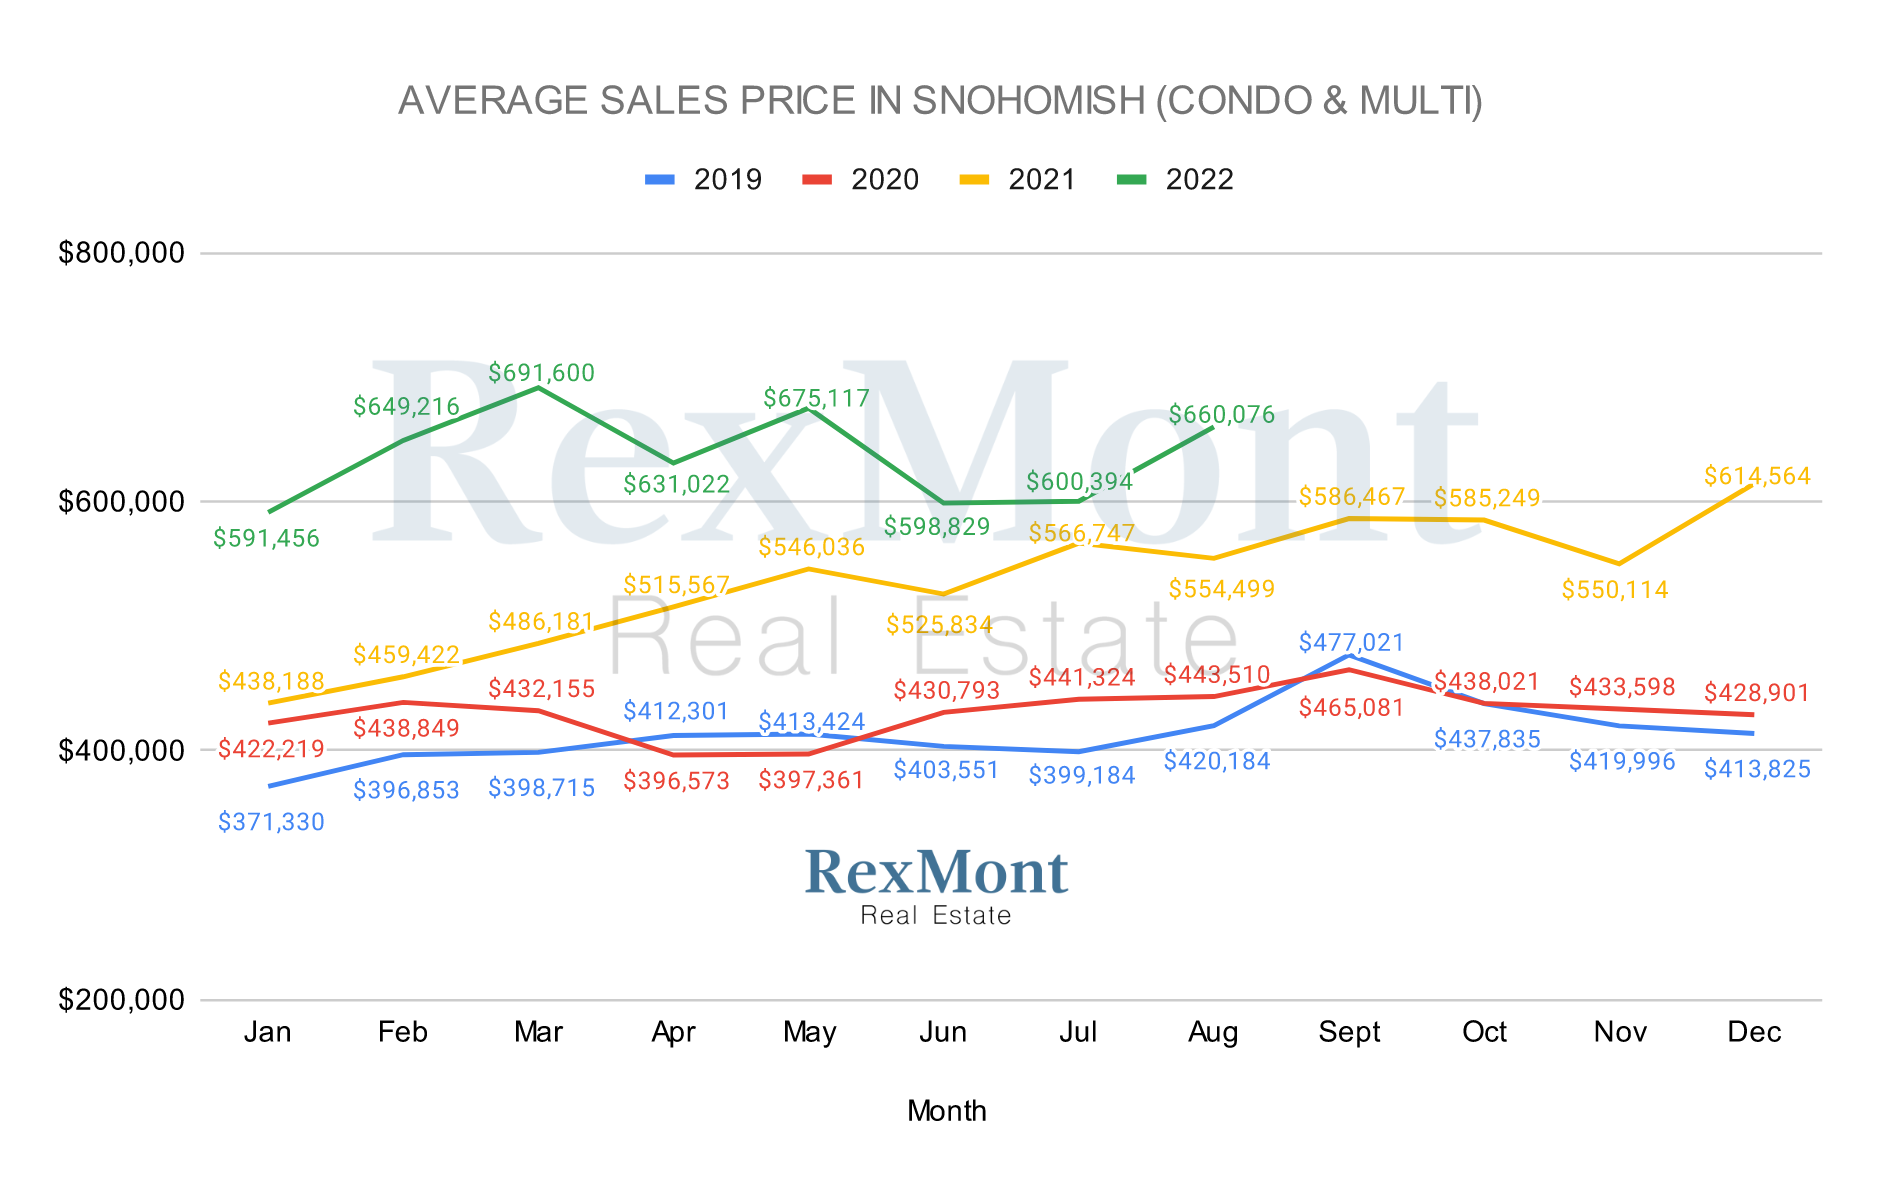 Graph of the Average Monthly Sales Price for Condos in Snohomish County